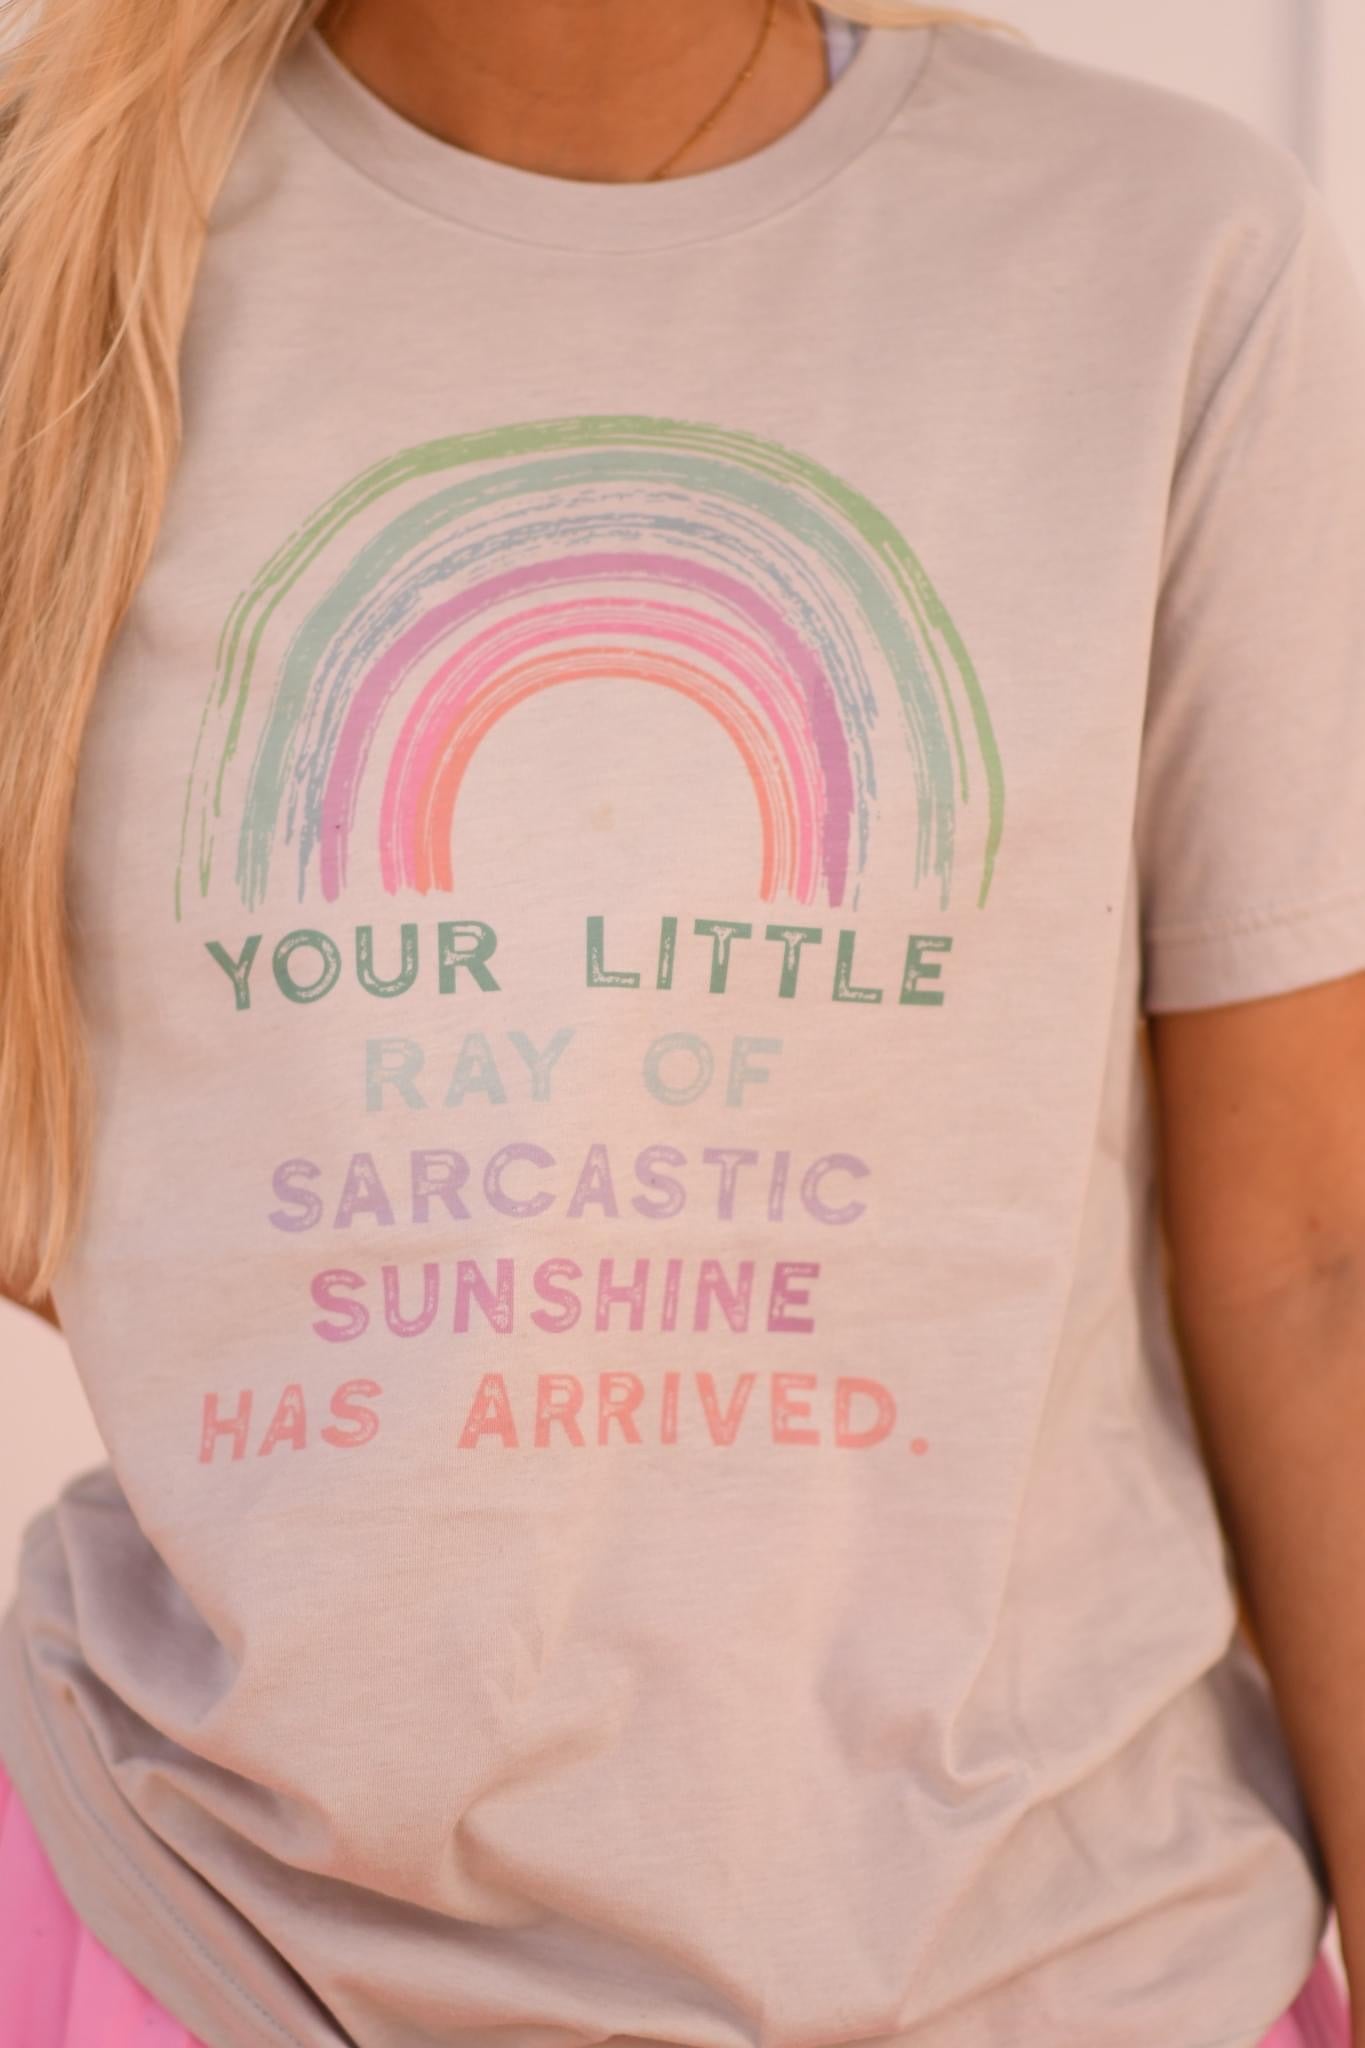 Your little ray of sarcastic sunshine